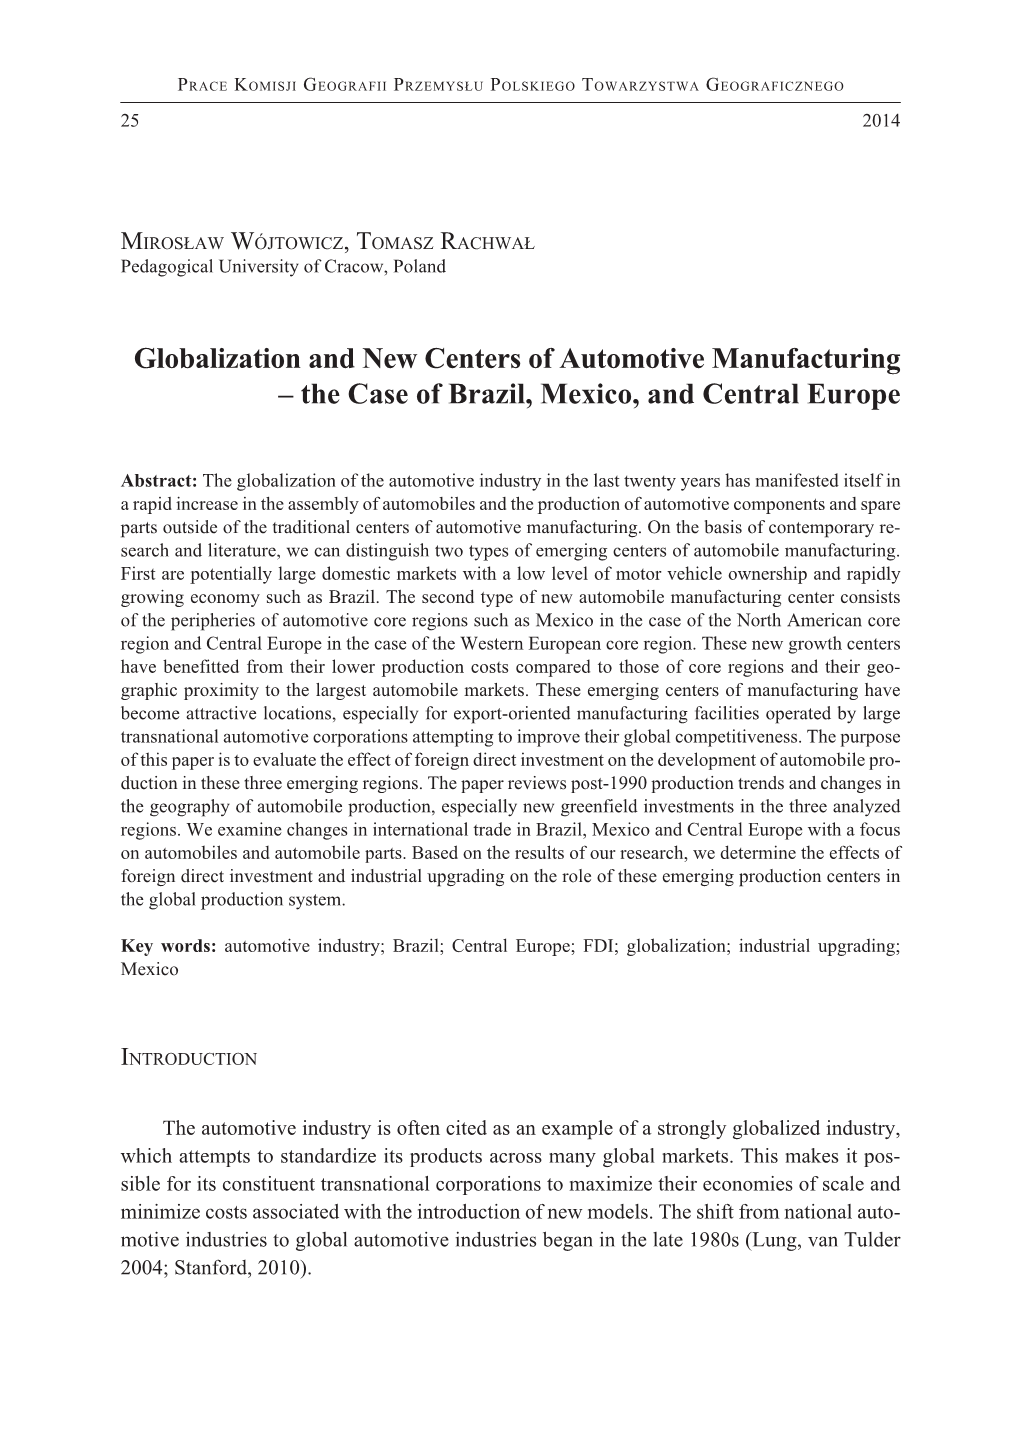 Globalization and New Centers of Automotive Manufacturing – the Case of Brazil, Mexico, and Central Europe